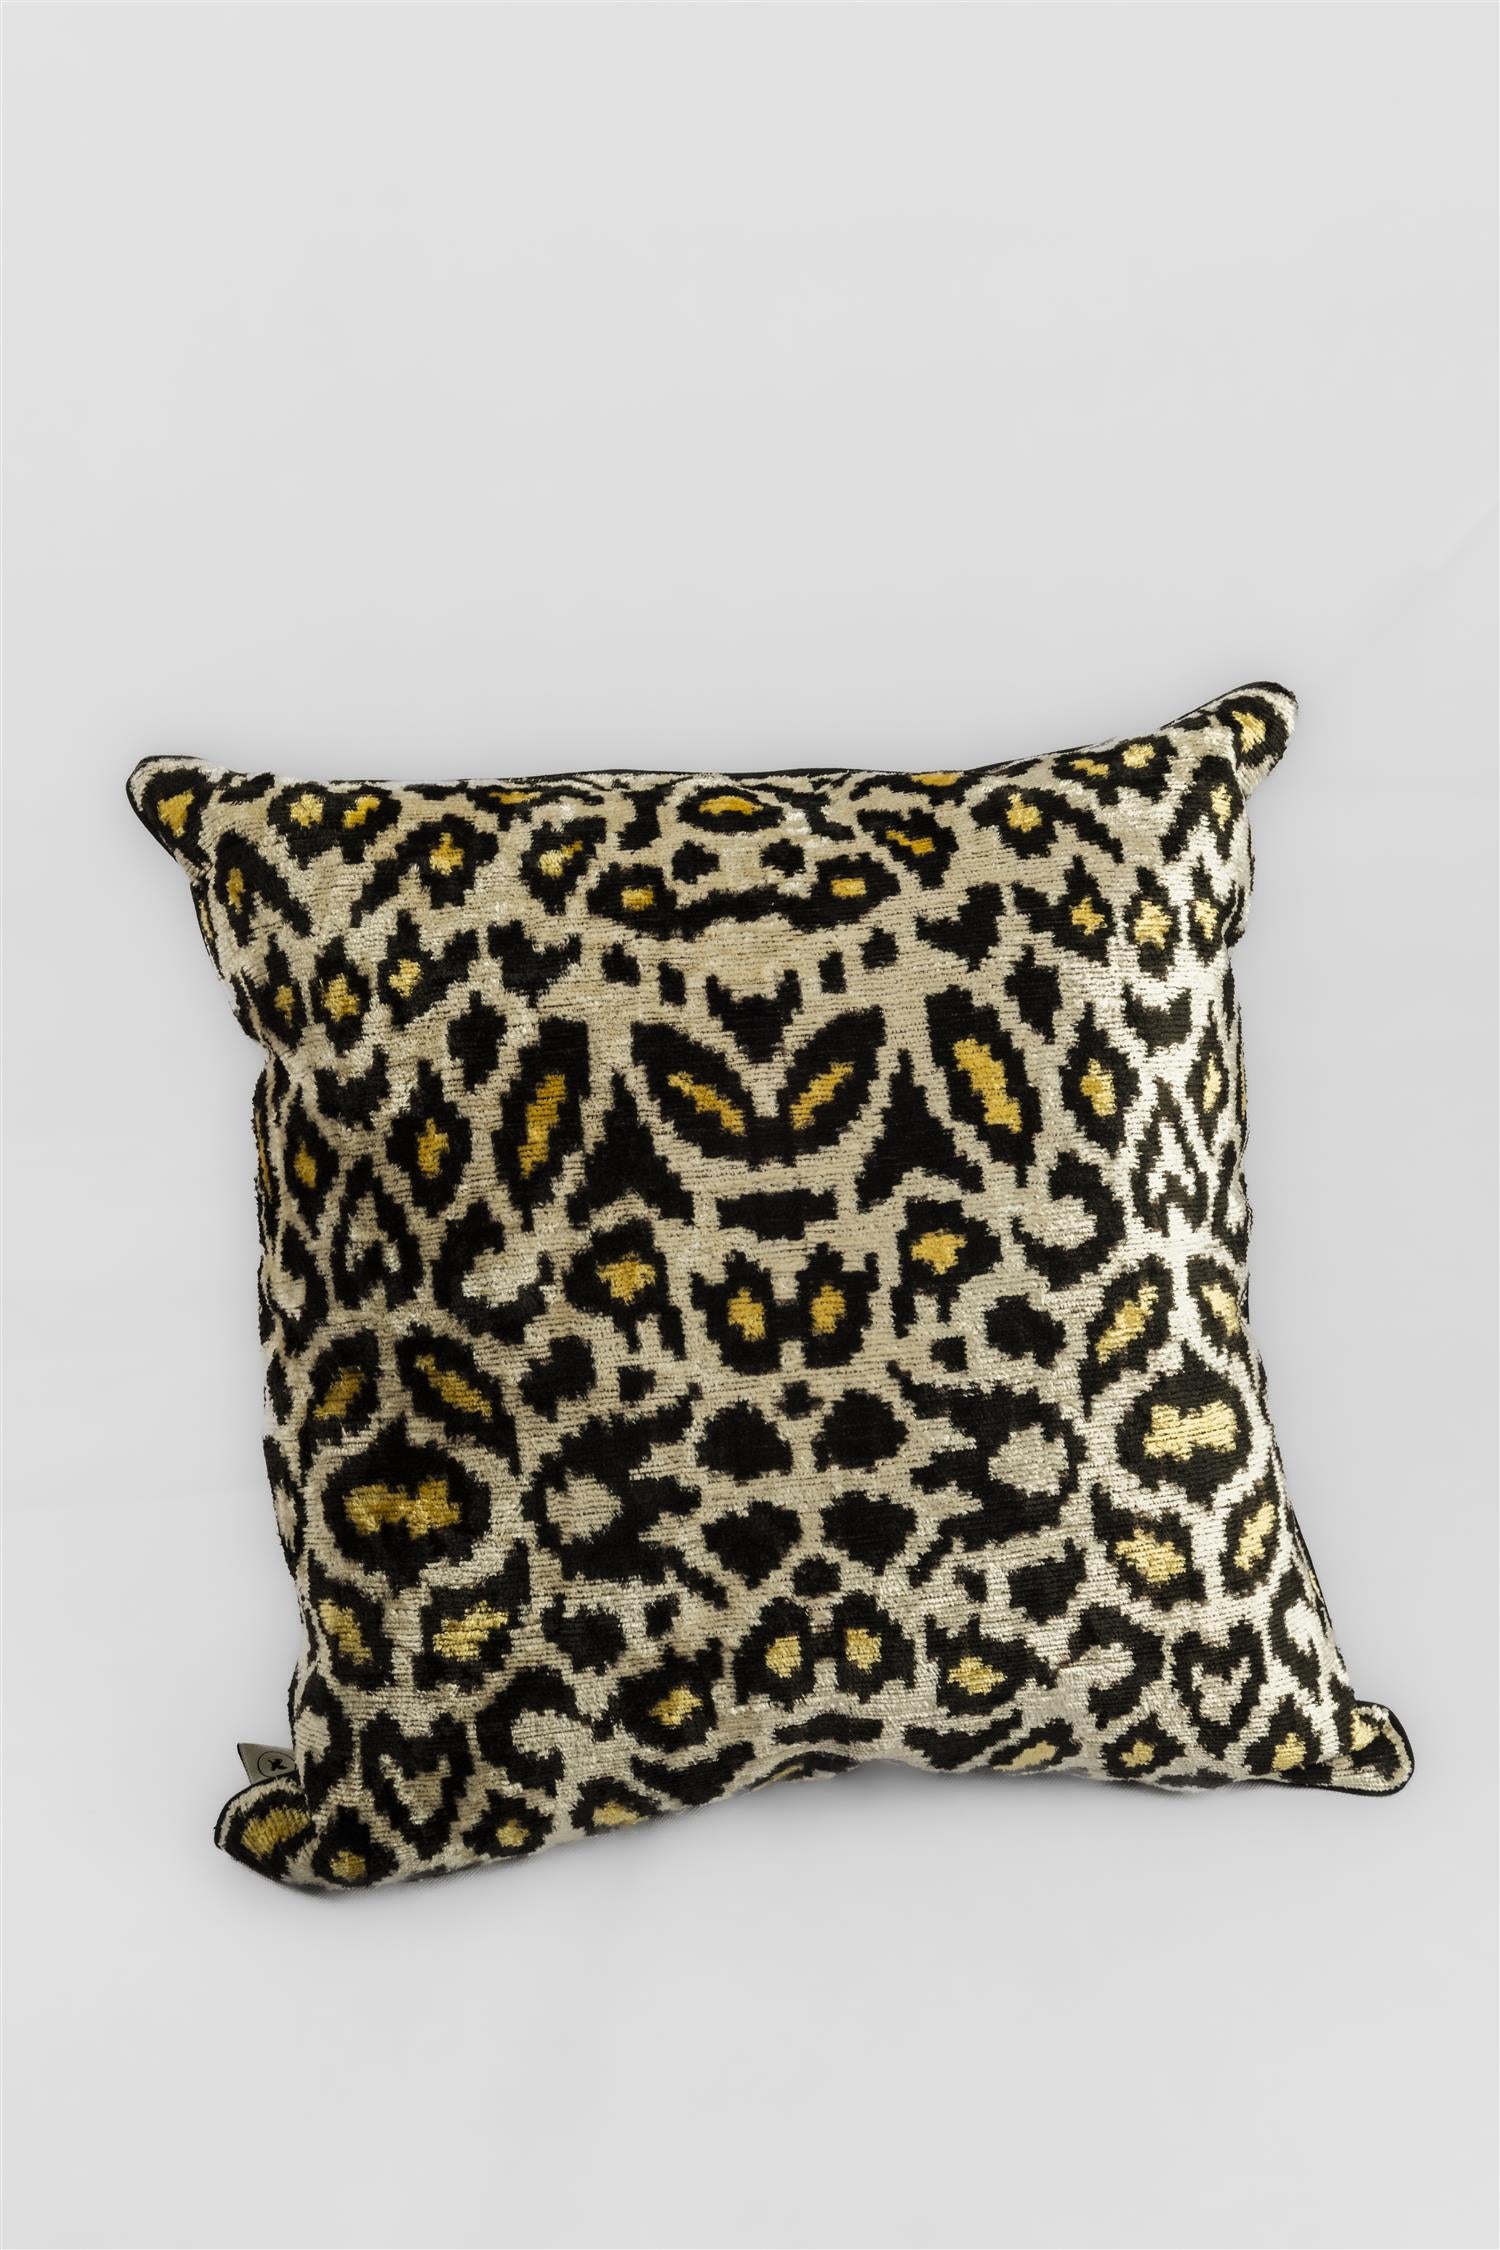 Chat Sauvage leopard 50 x 50